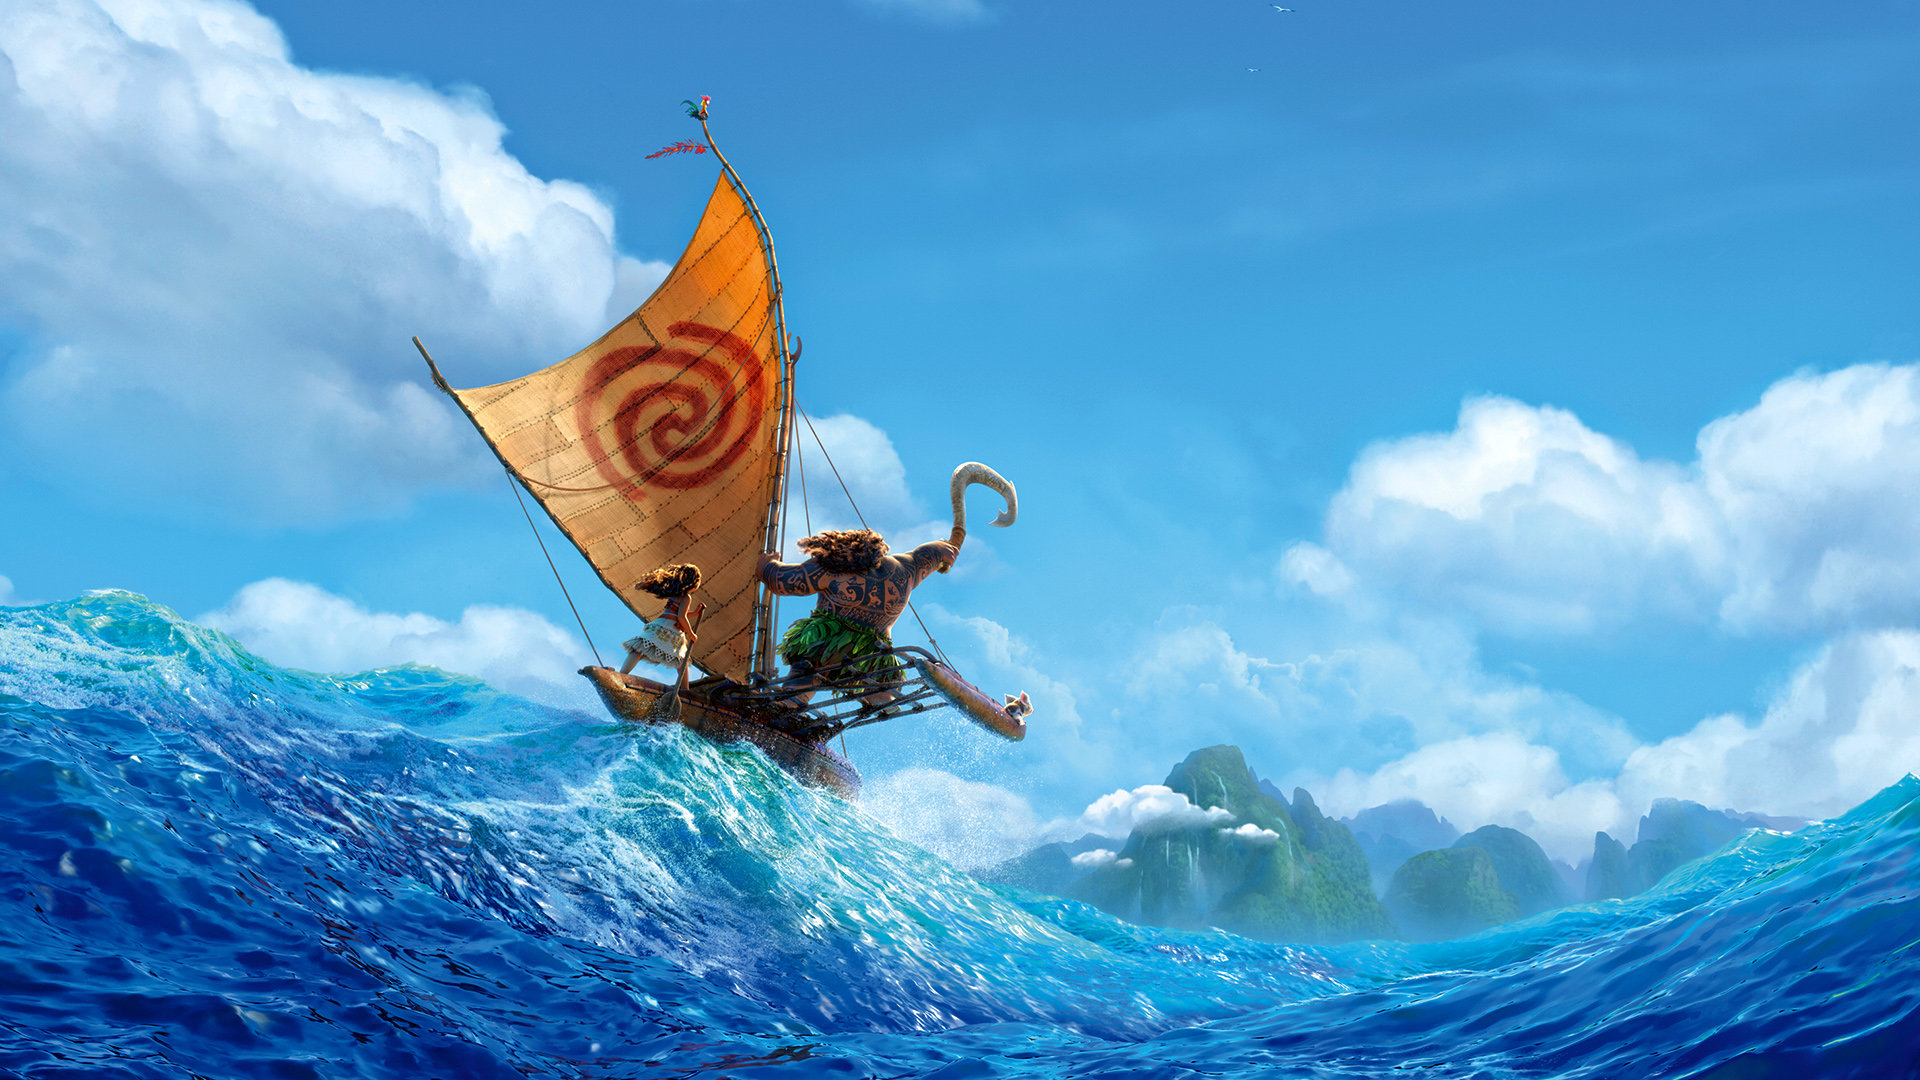 Download full hd 1920x1080 Moana PC background ID:321698 for free